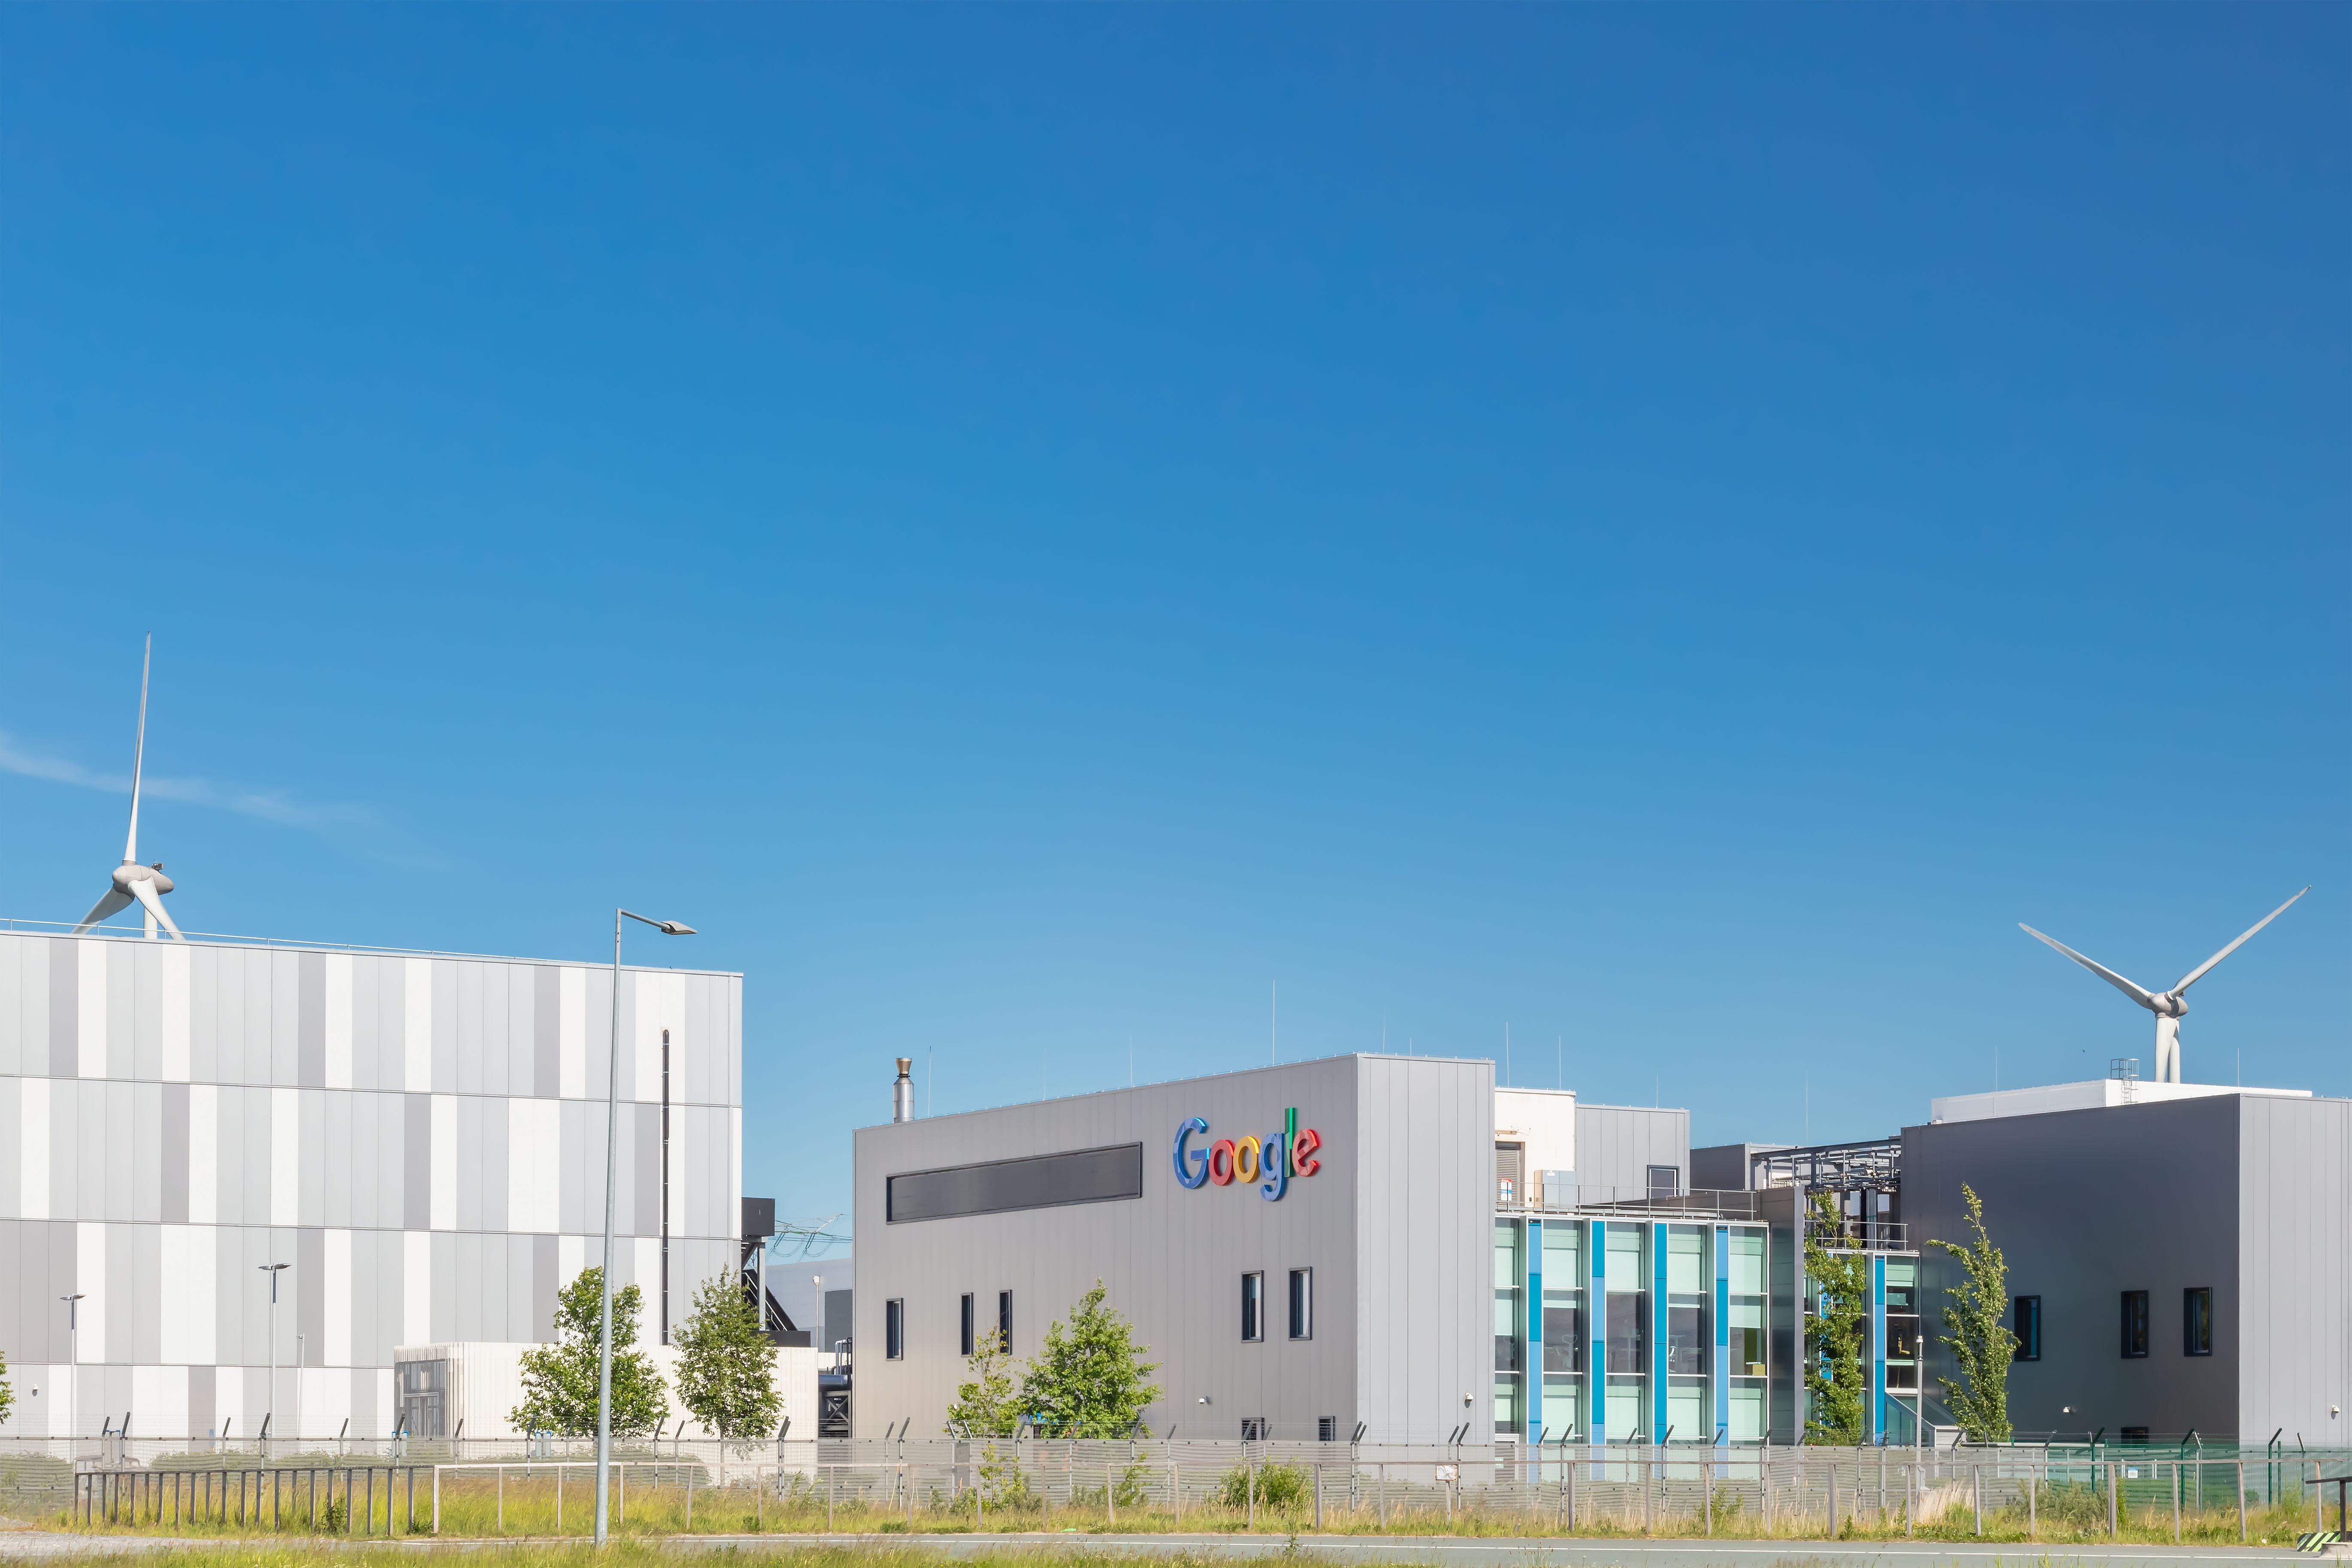  Entrance view of a Google data center in Eemshaven, The Netherlands. <br>